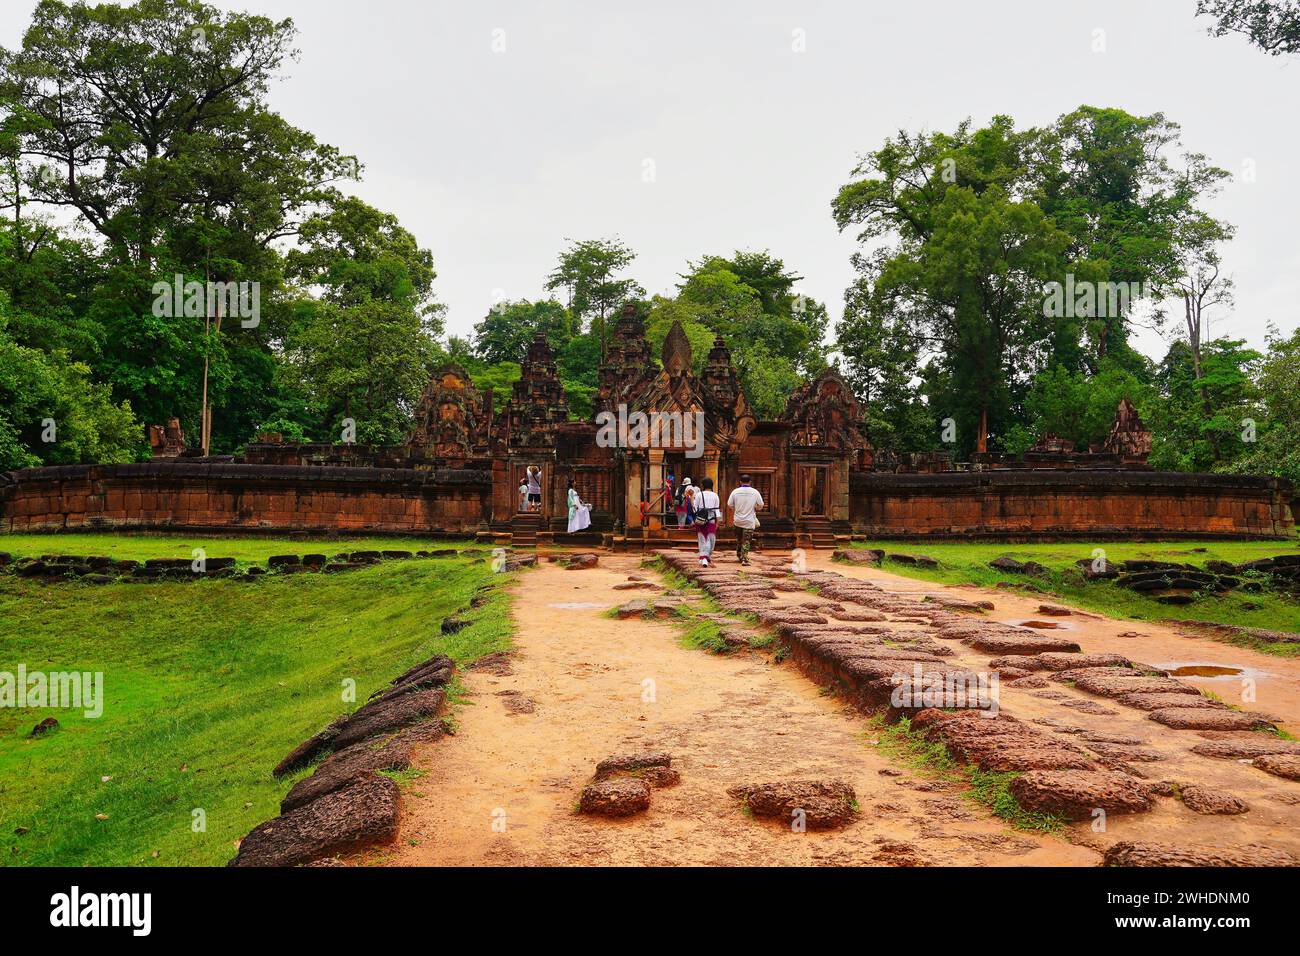 The entrance gate of the 10th century Banteay Srei temple, built by Rajendravarman, a masterpiece of early Khmer architecture in Siem Reap Stock Photo